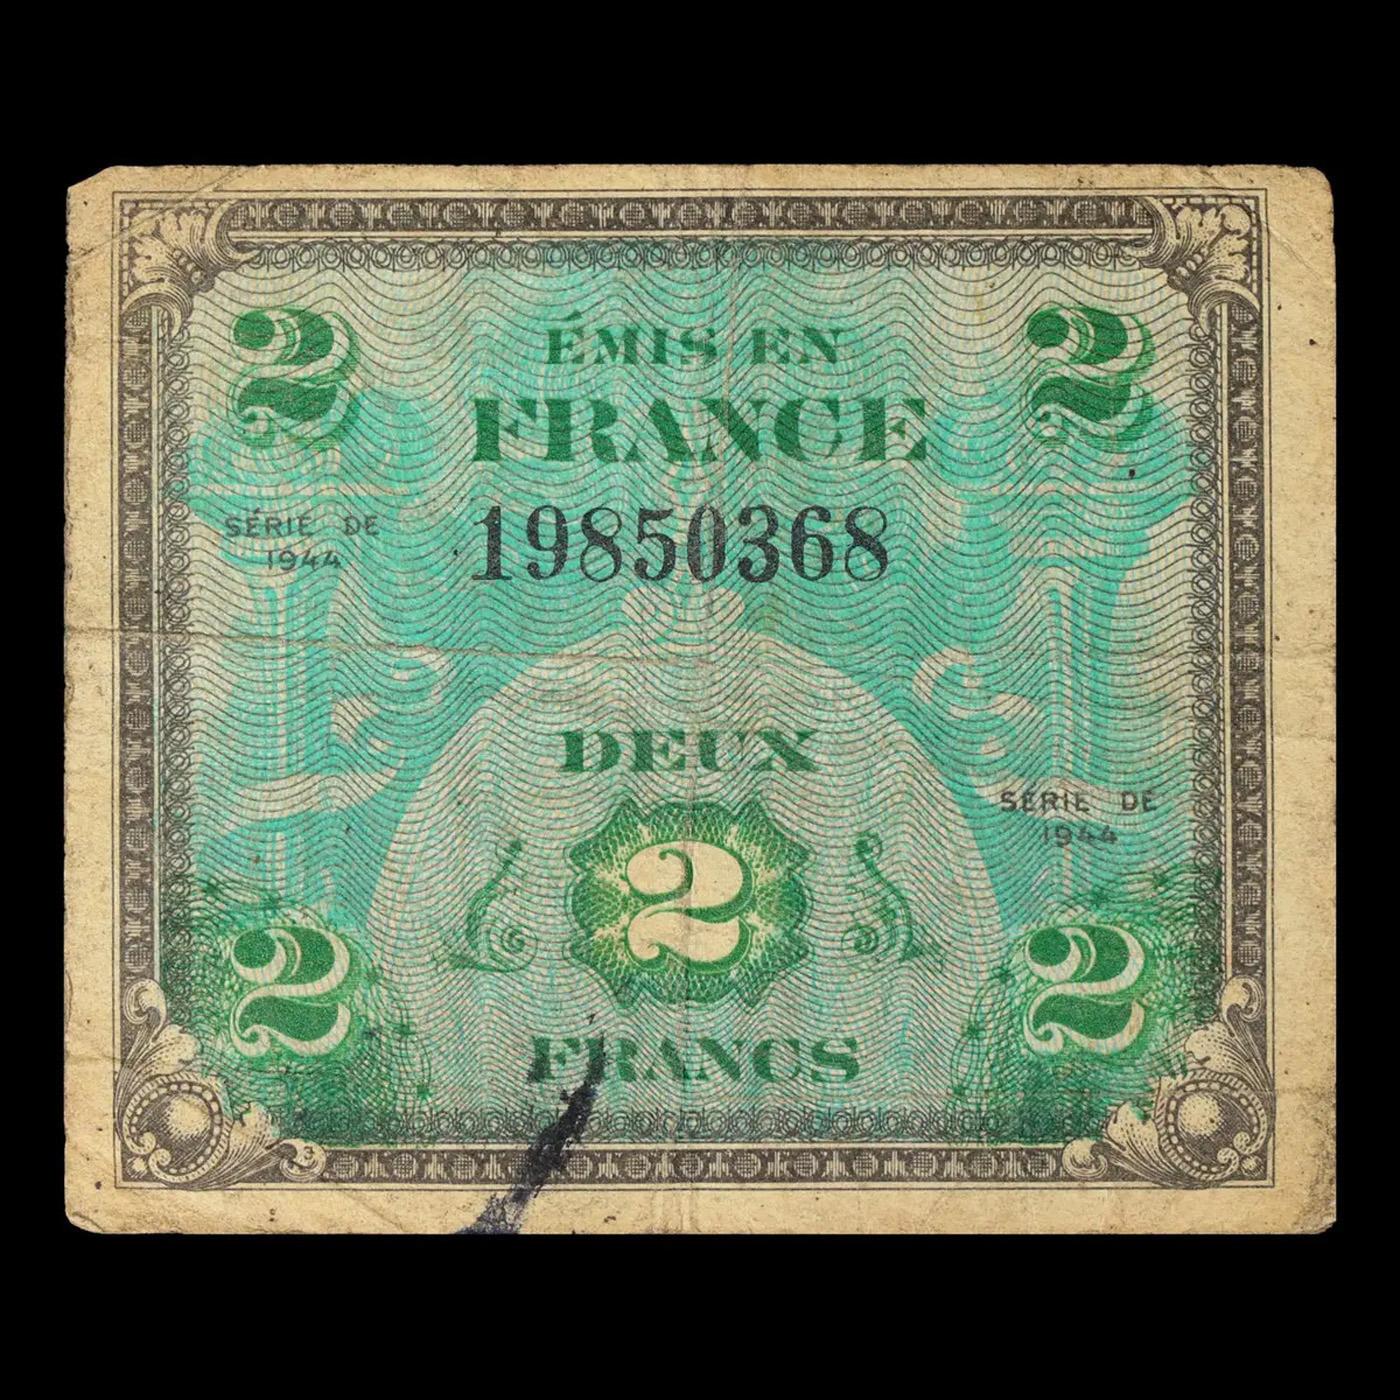 1944 France 2 Franc Allied Liberation Note P# 114A Grades vf+